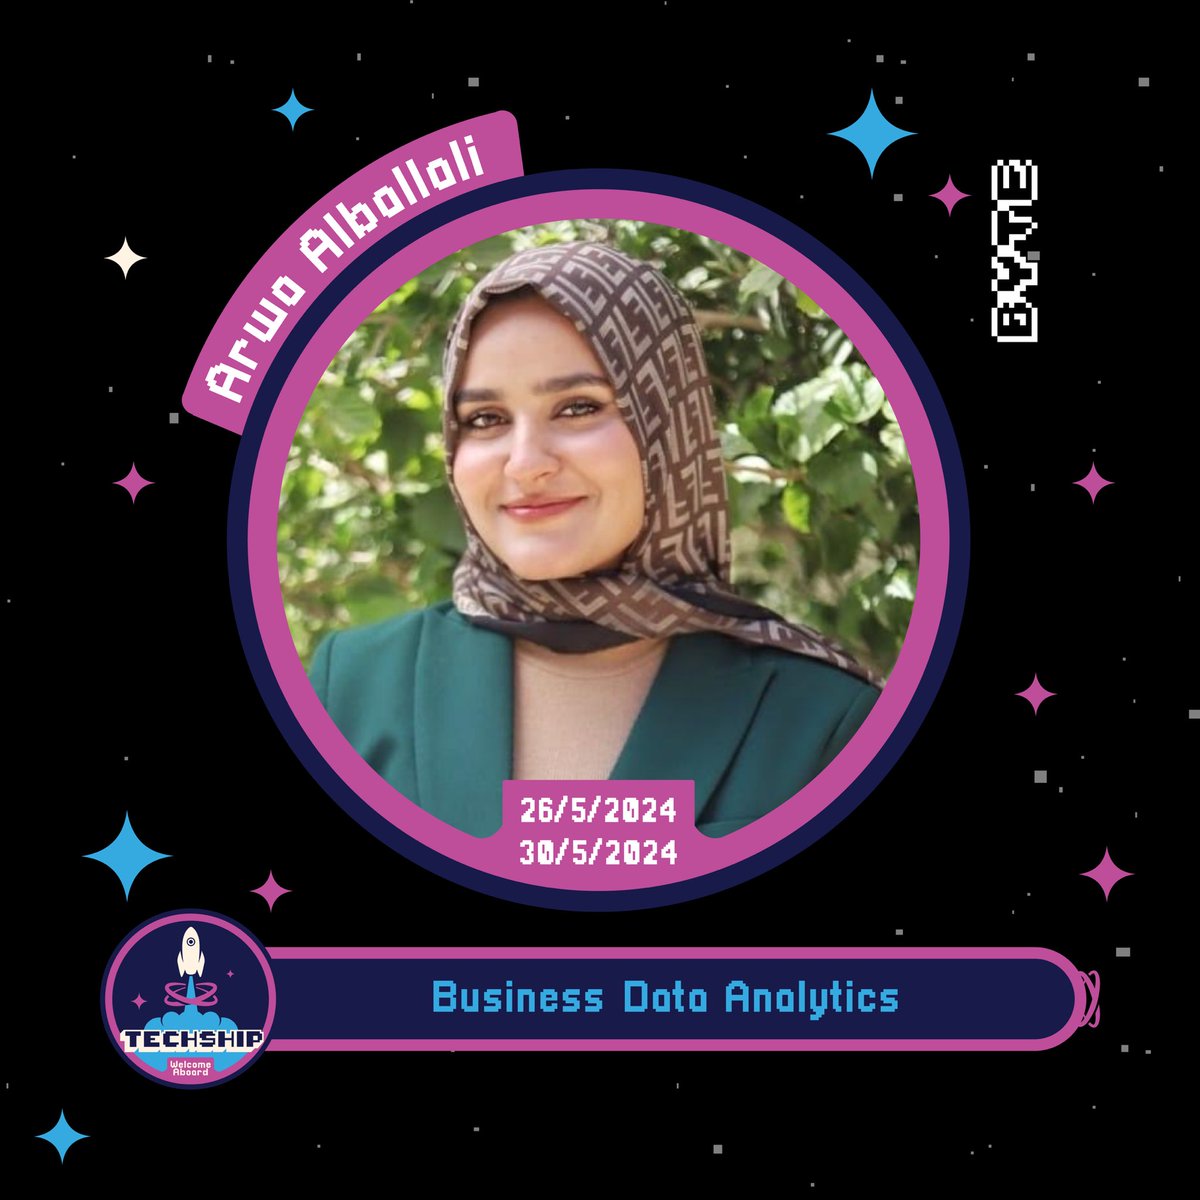 TechShip 3rd Trip 🚀 
Business Data Analytics 
🎙️ Lead by: Arwa Alballali 
🗓️ Date: Sunday 26th of May - Thursday 30th of May 
🕟 Time: 4:30 PM - 8:00 PM 

#TechShip🚀 
Welcome Aboard! 

Funded by US State Department through Alumni Engagement Innovation Fund (AEIF)